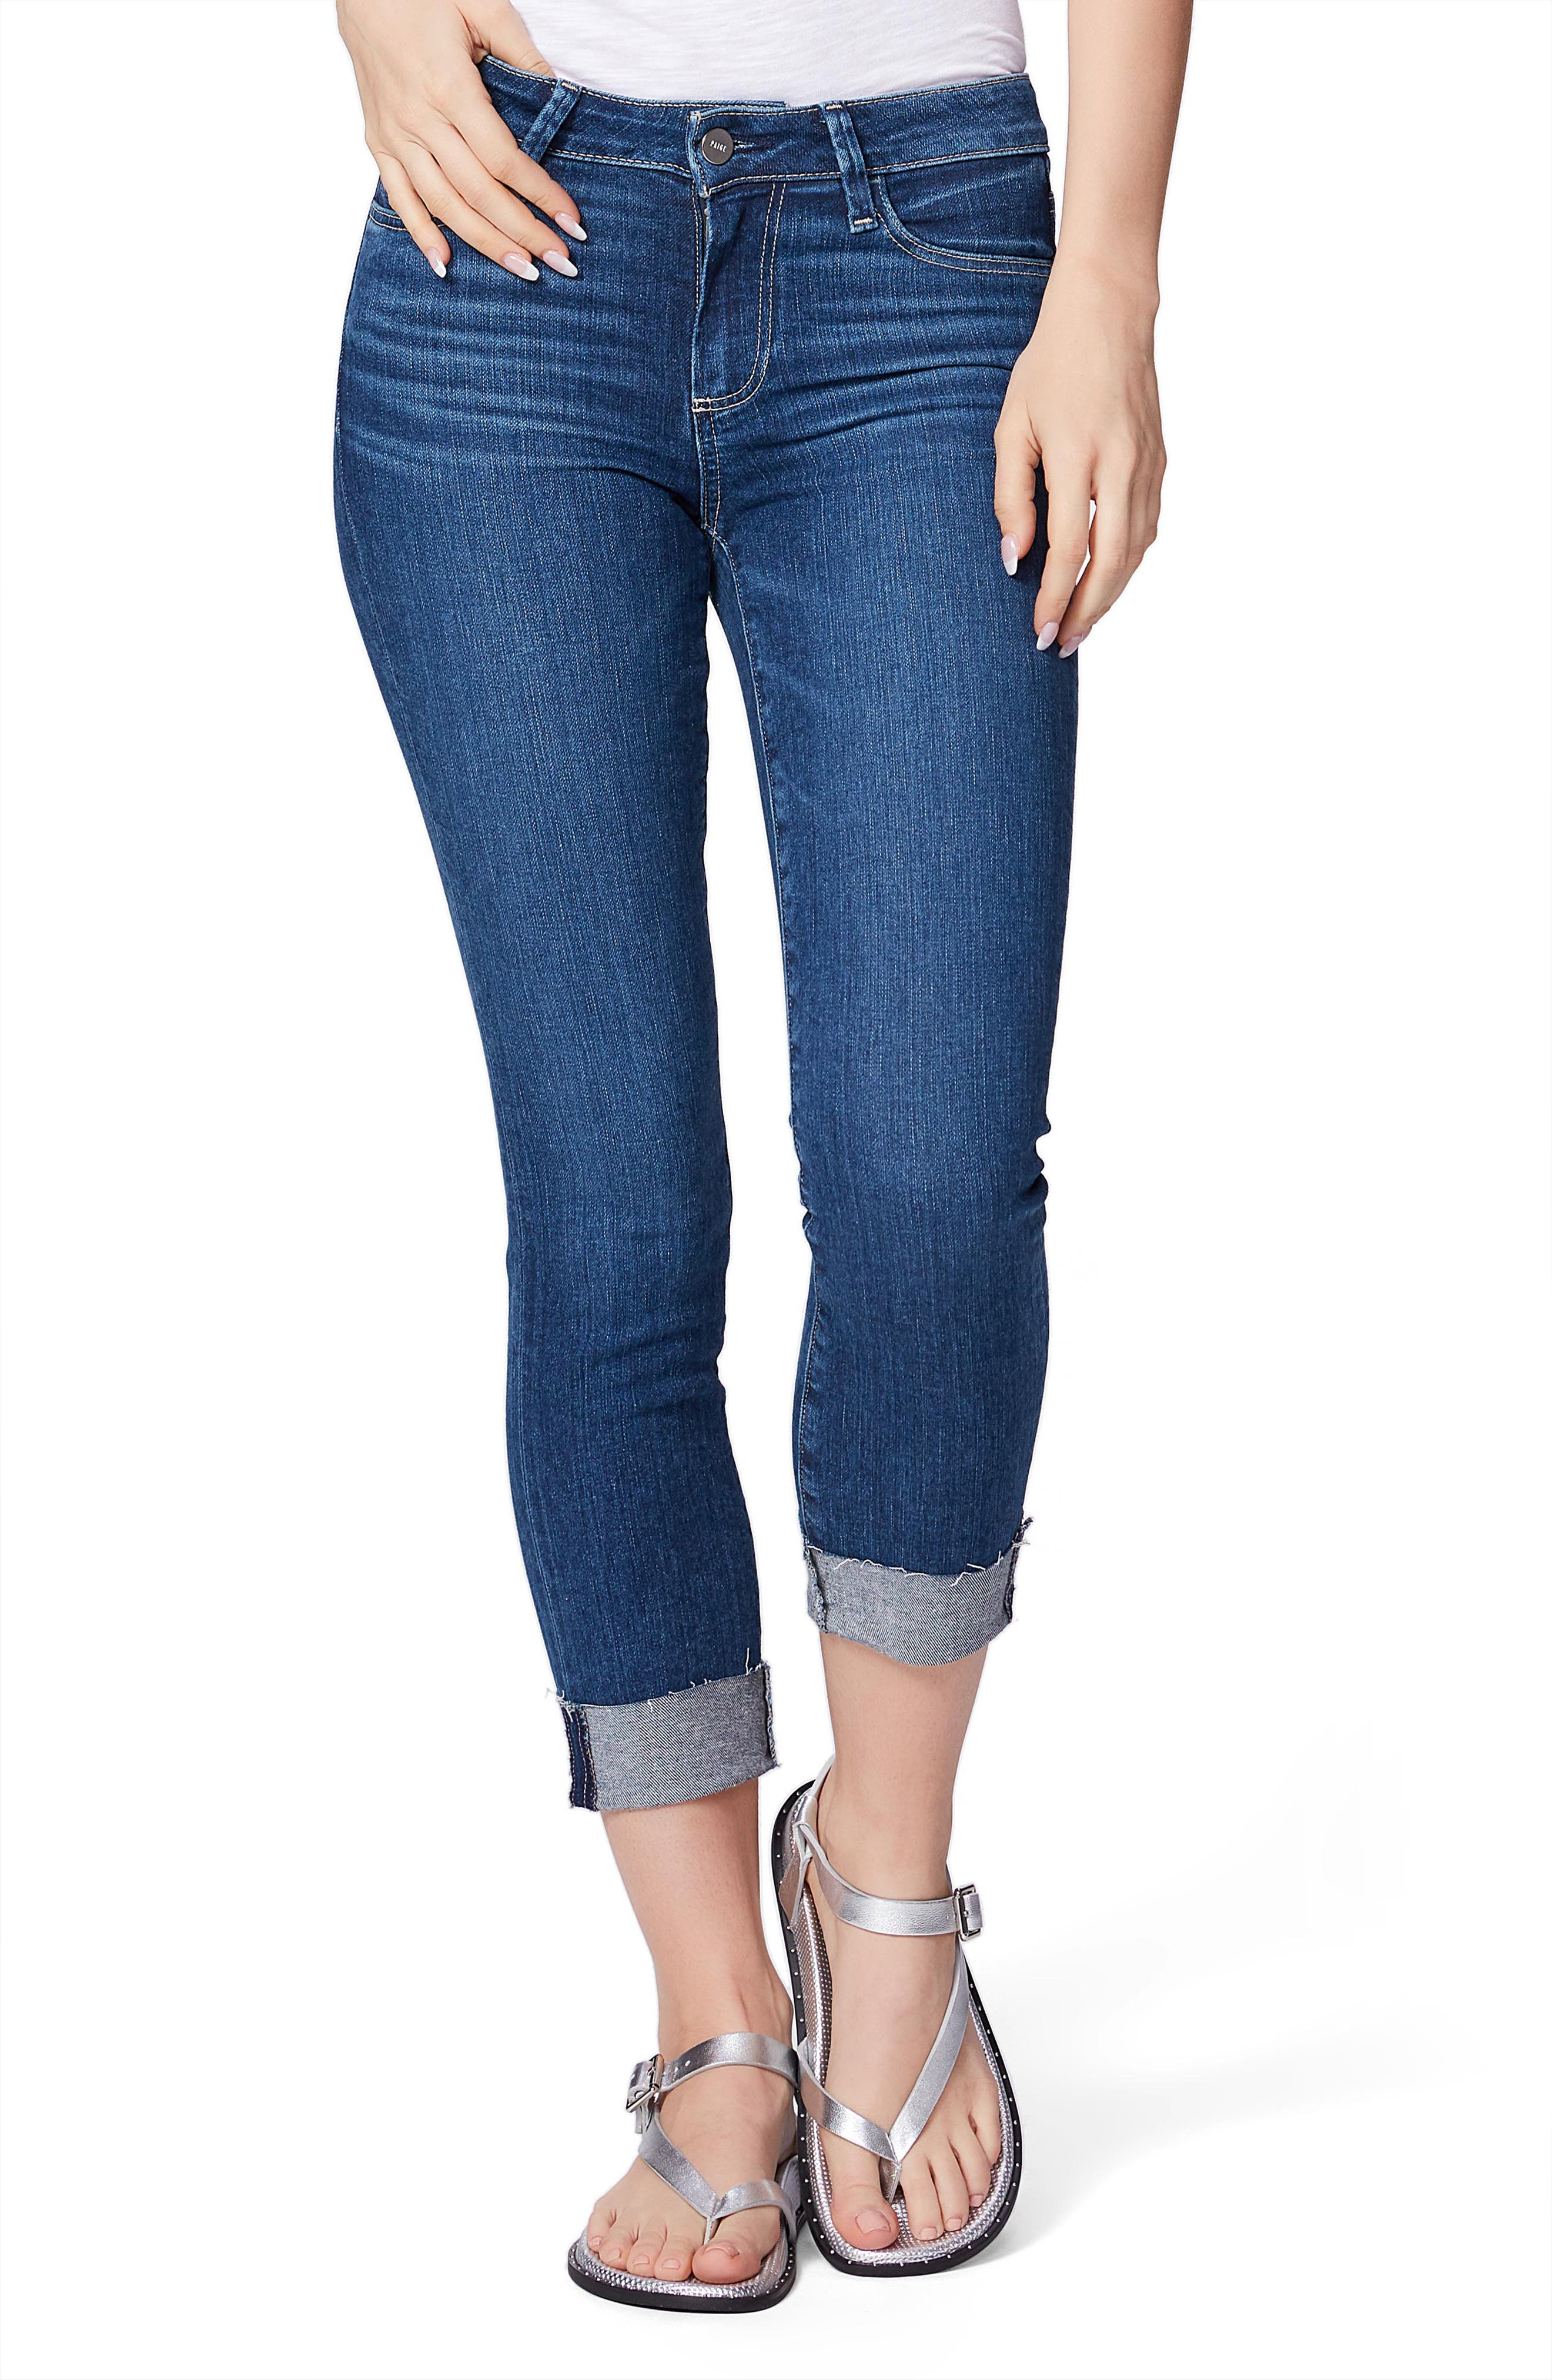 paige cropped jeans